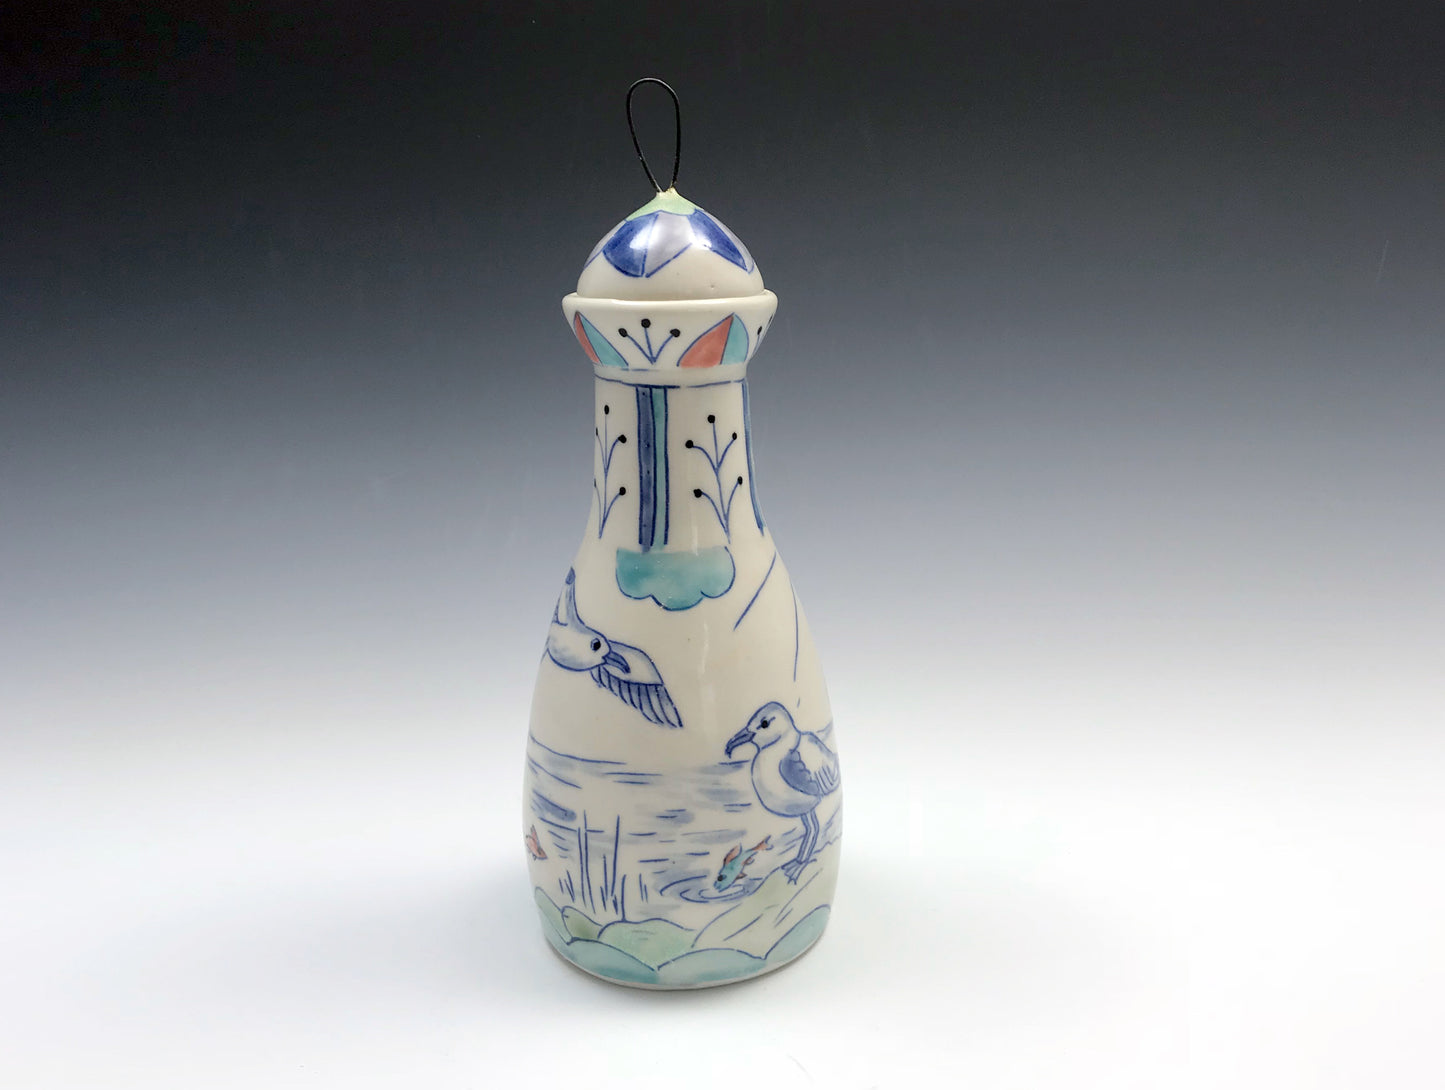 Bottle with seaguls